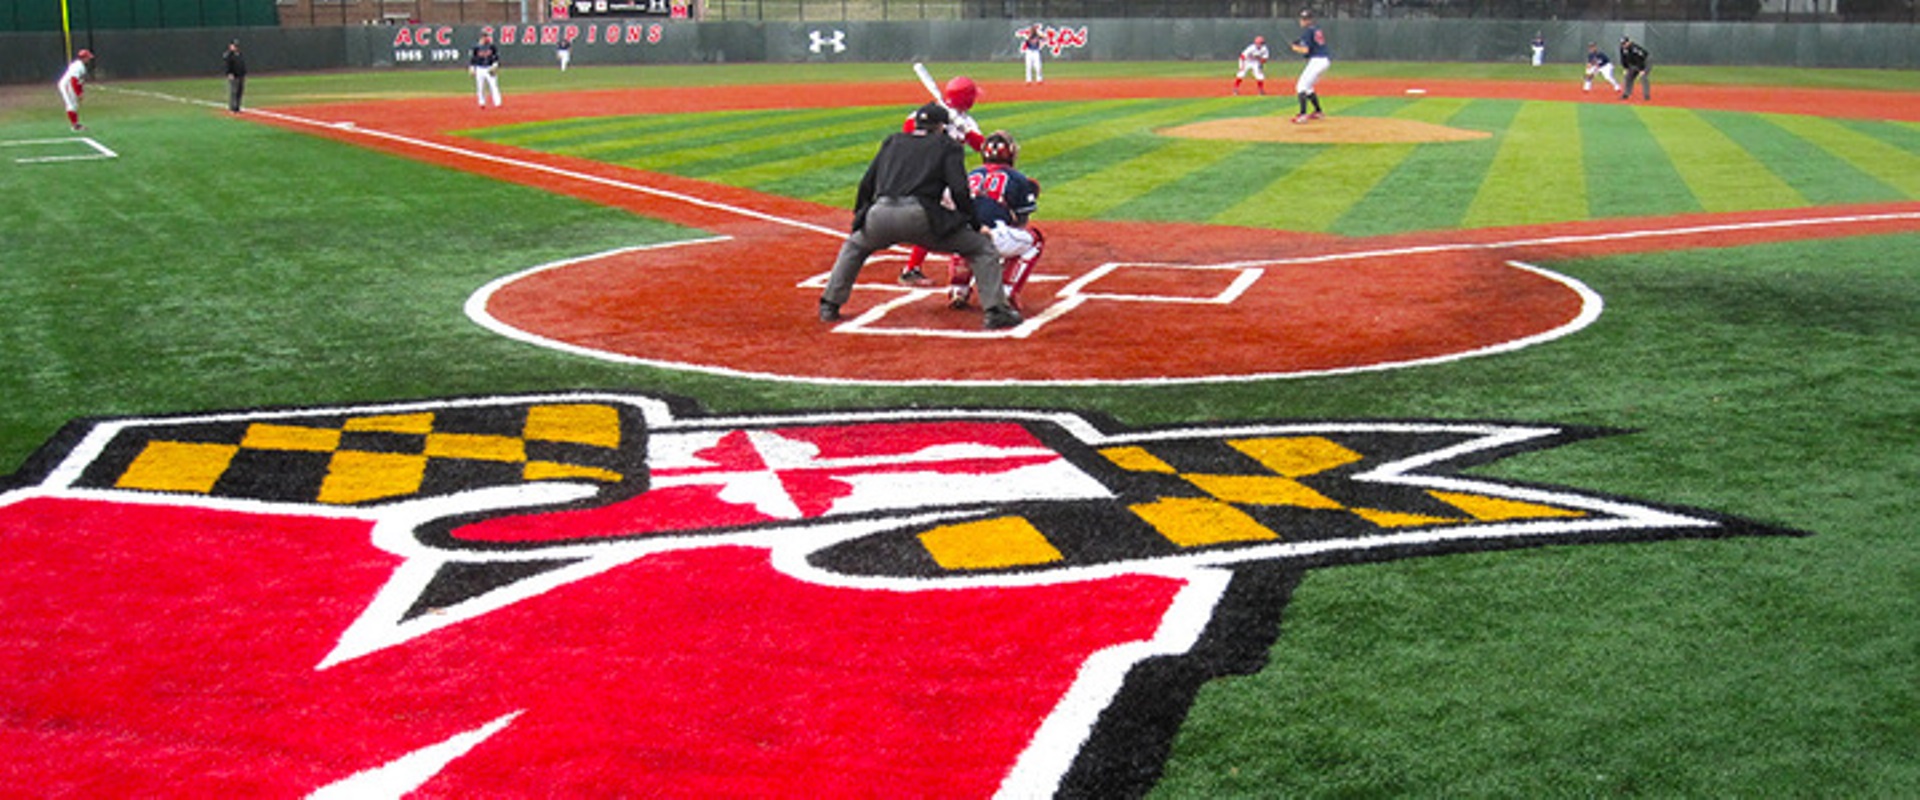 university-of-maryland-unveils-plans-for-new-fieldturf-baseball-field